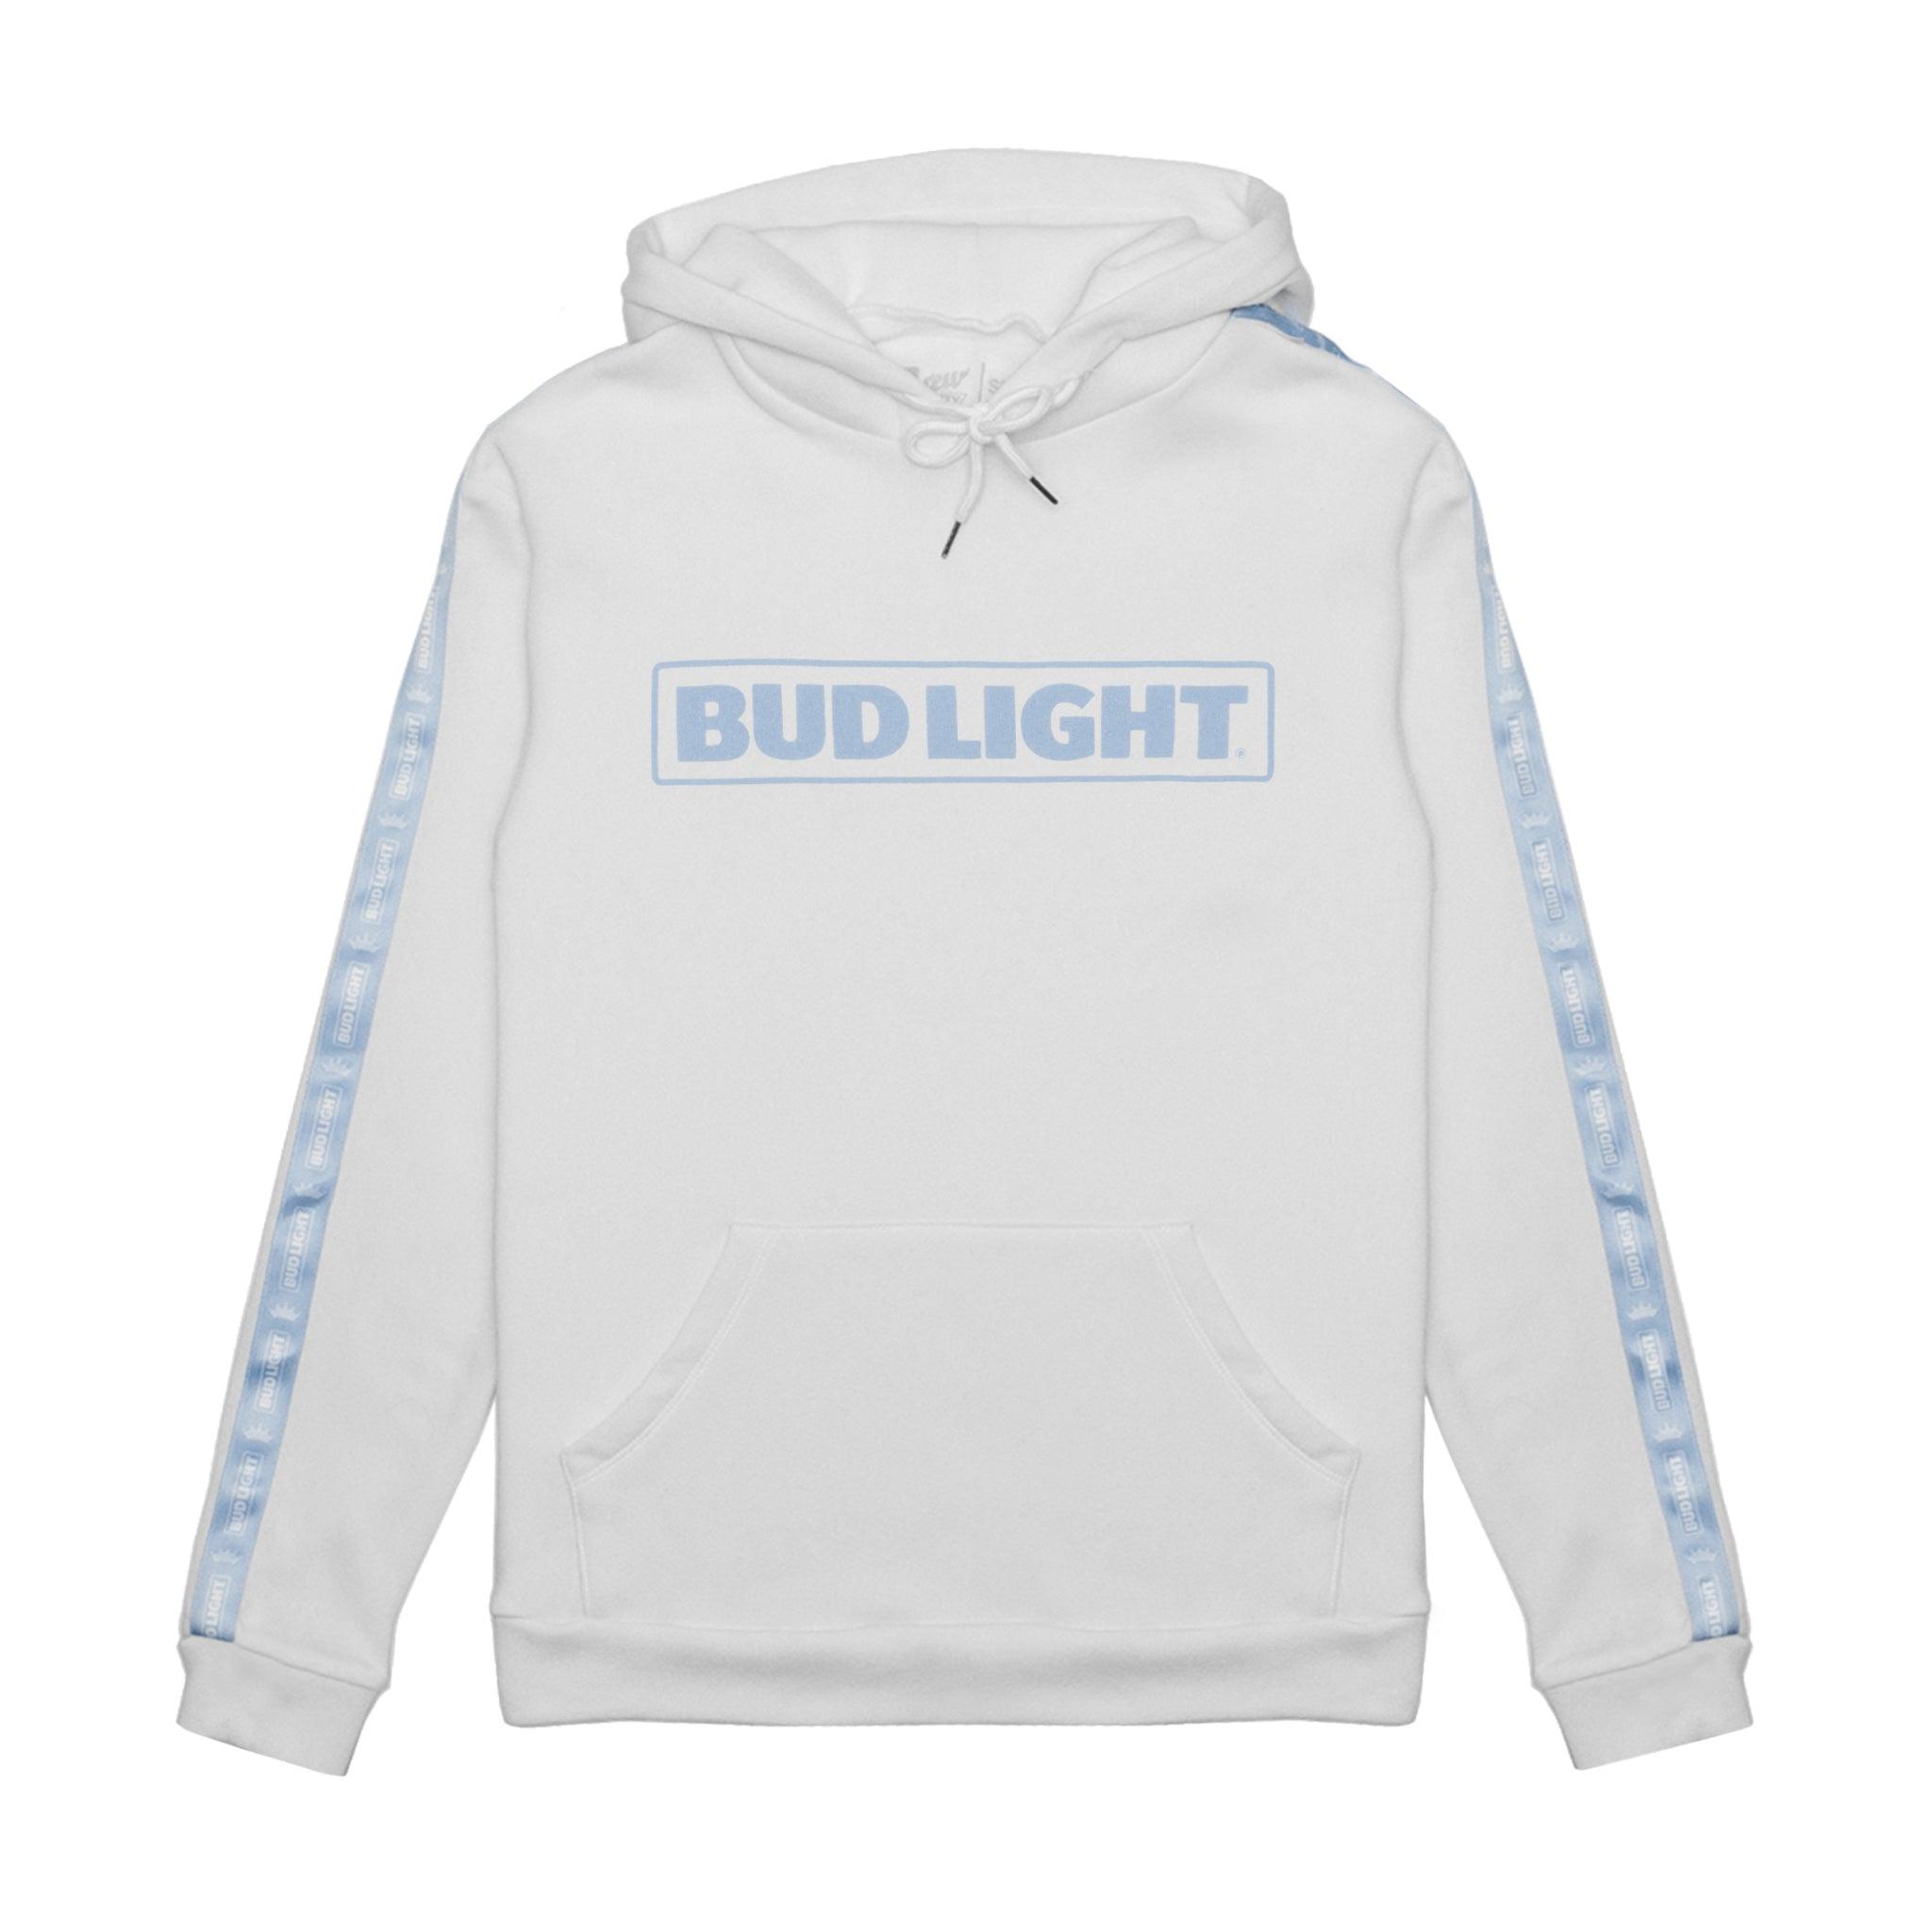 White Bud Light hoodie with Bud light horizontal logo on front chest.